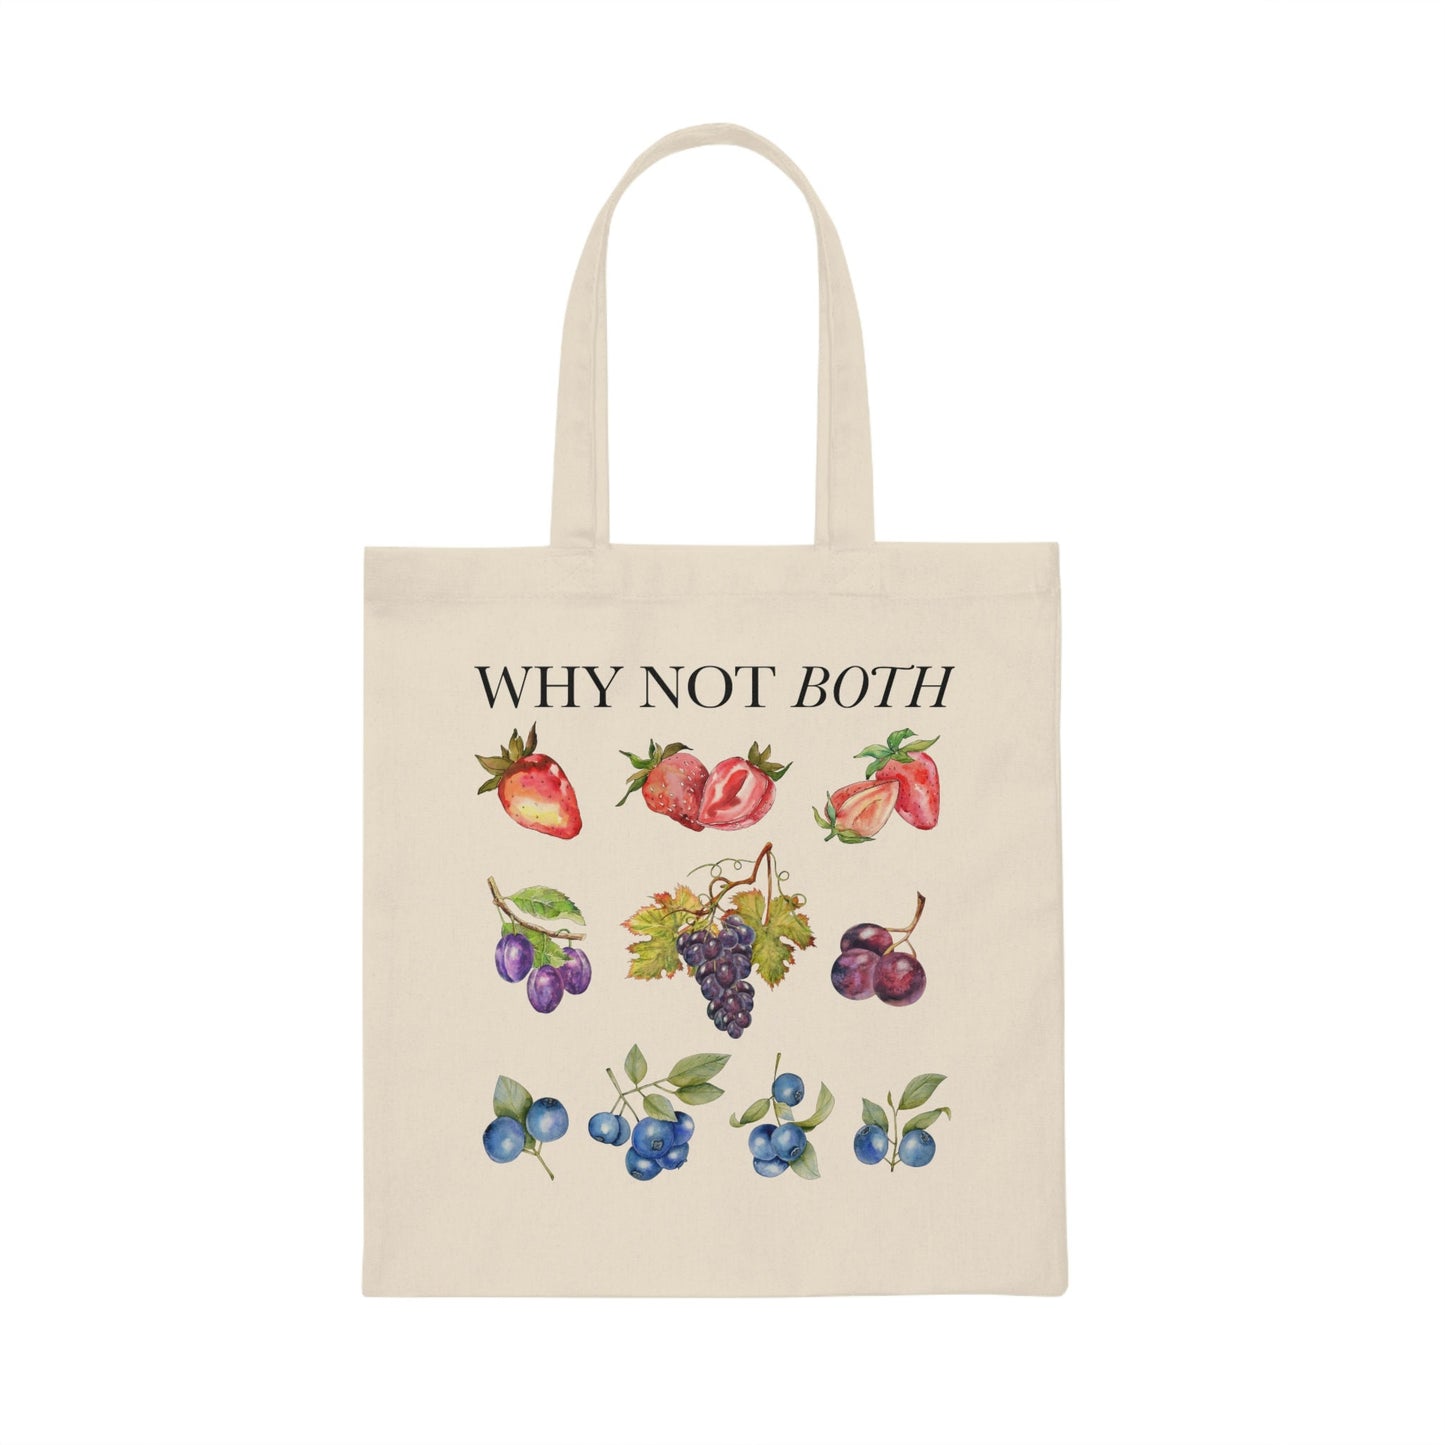 Why not both tote bag